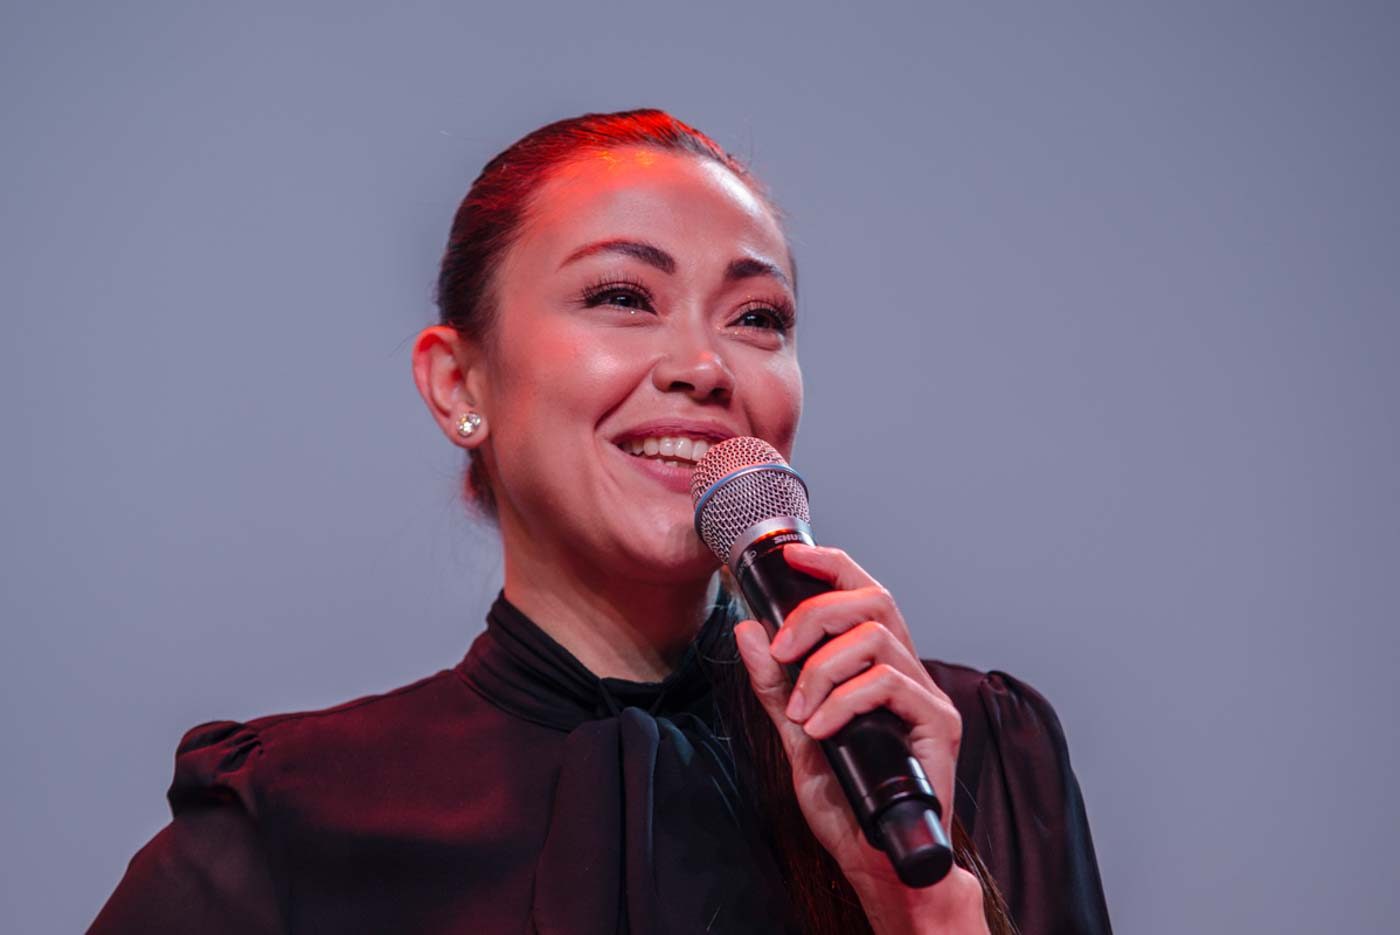 Jodi Sta Maria on mental health: ‘I pray to put up a clinic to help people’